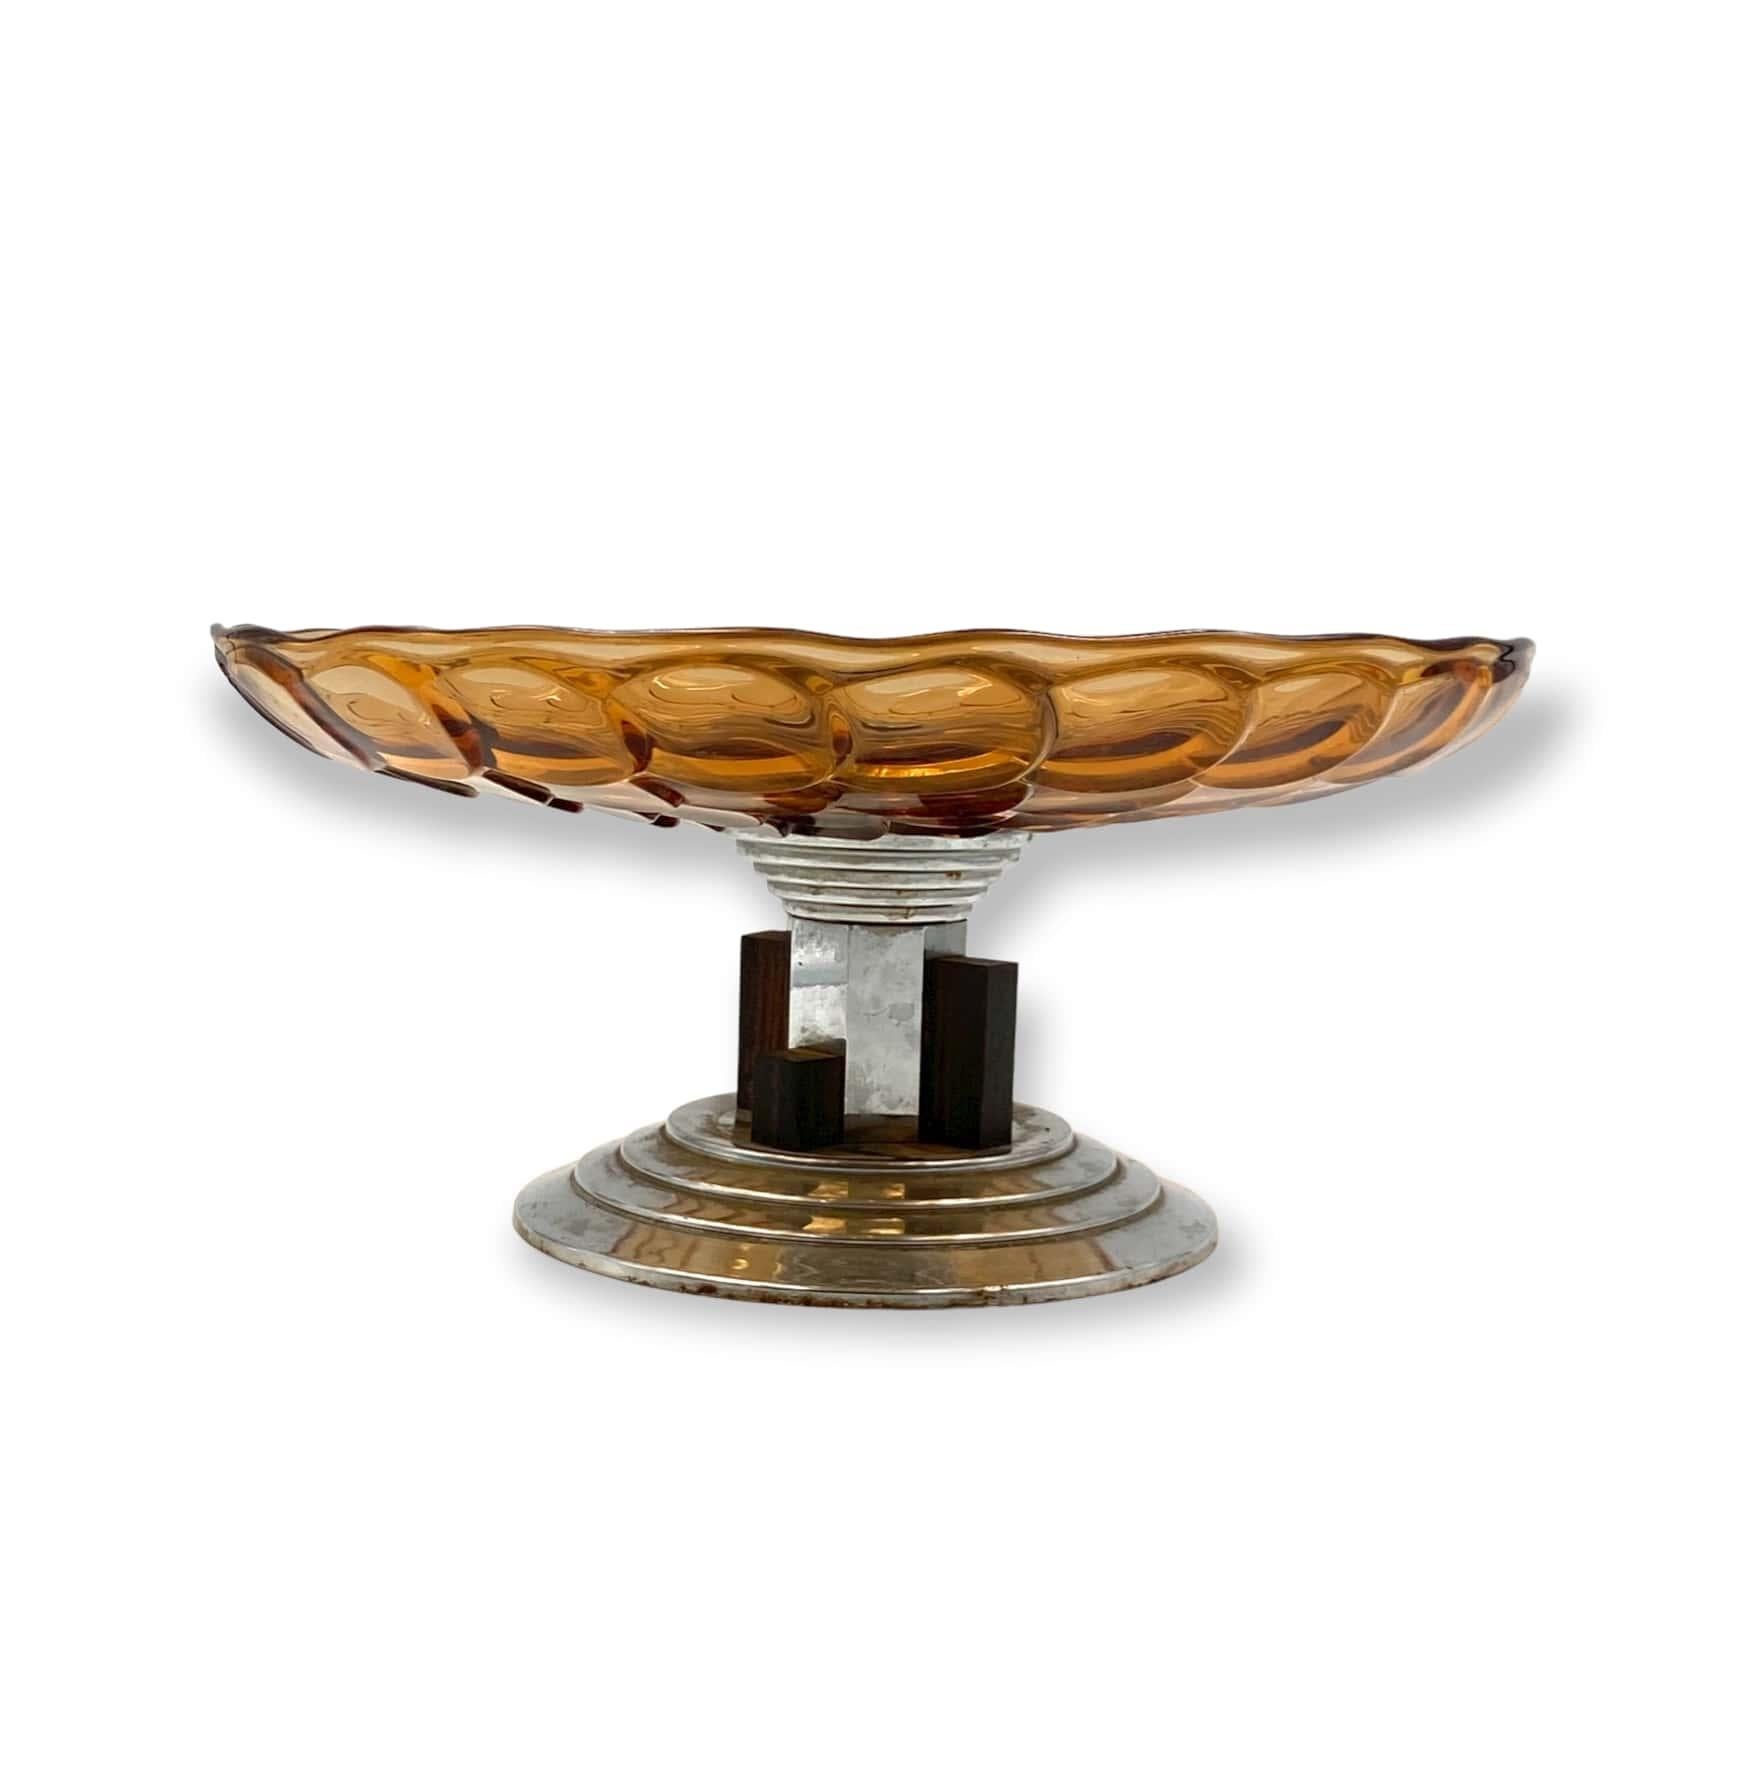 Mid-20th Century Art Deco Orange Scaled Glass Centerpiece, France, 1930s For Sale